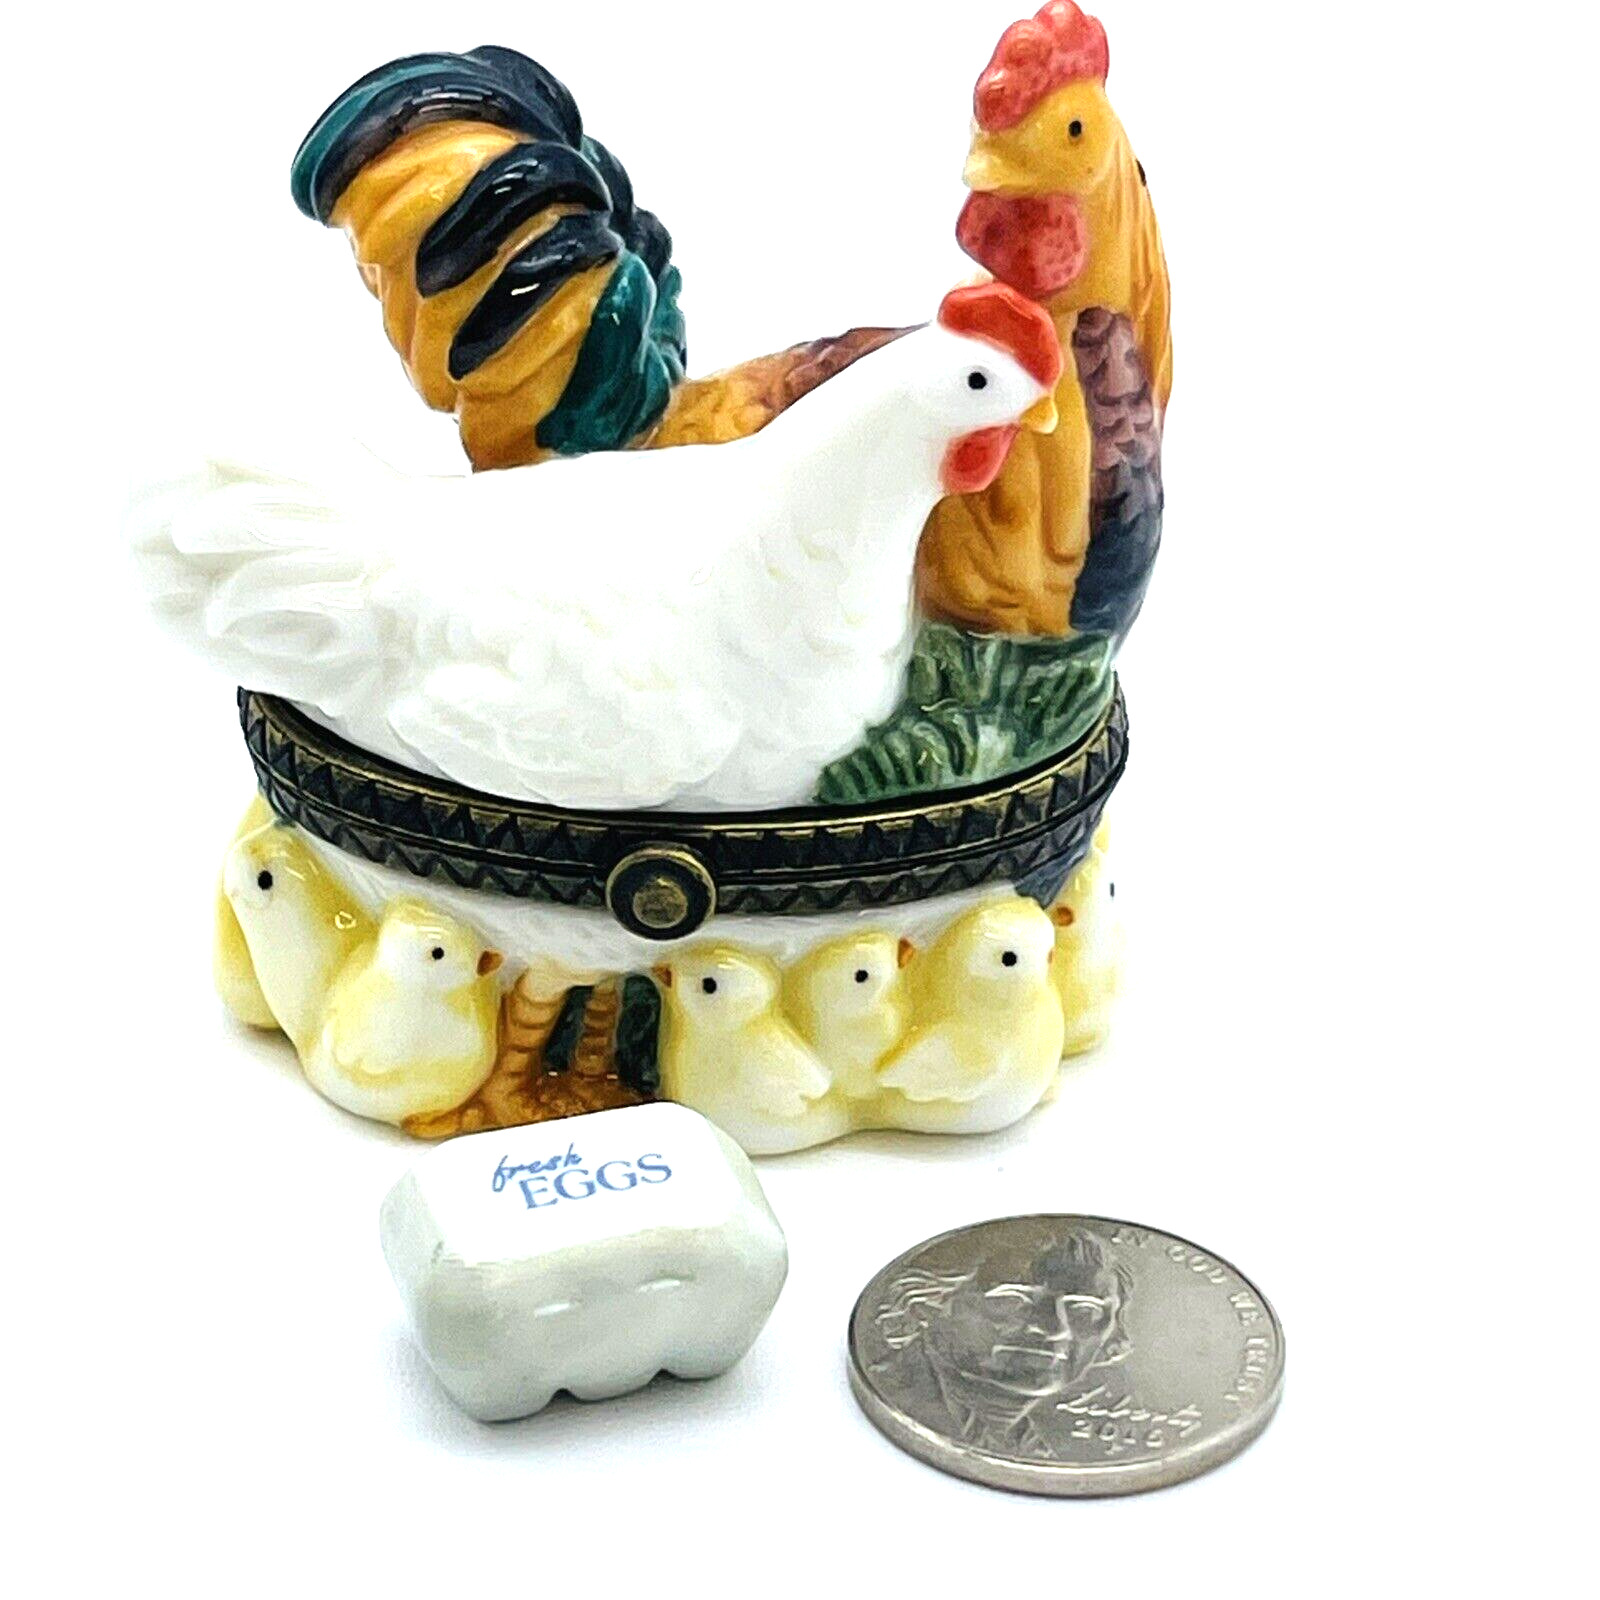 Vintage PHB Chicken Rooster Hinged Porcelain Trinket Box with Egg Carton Trinket